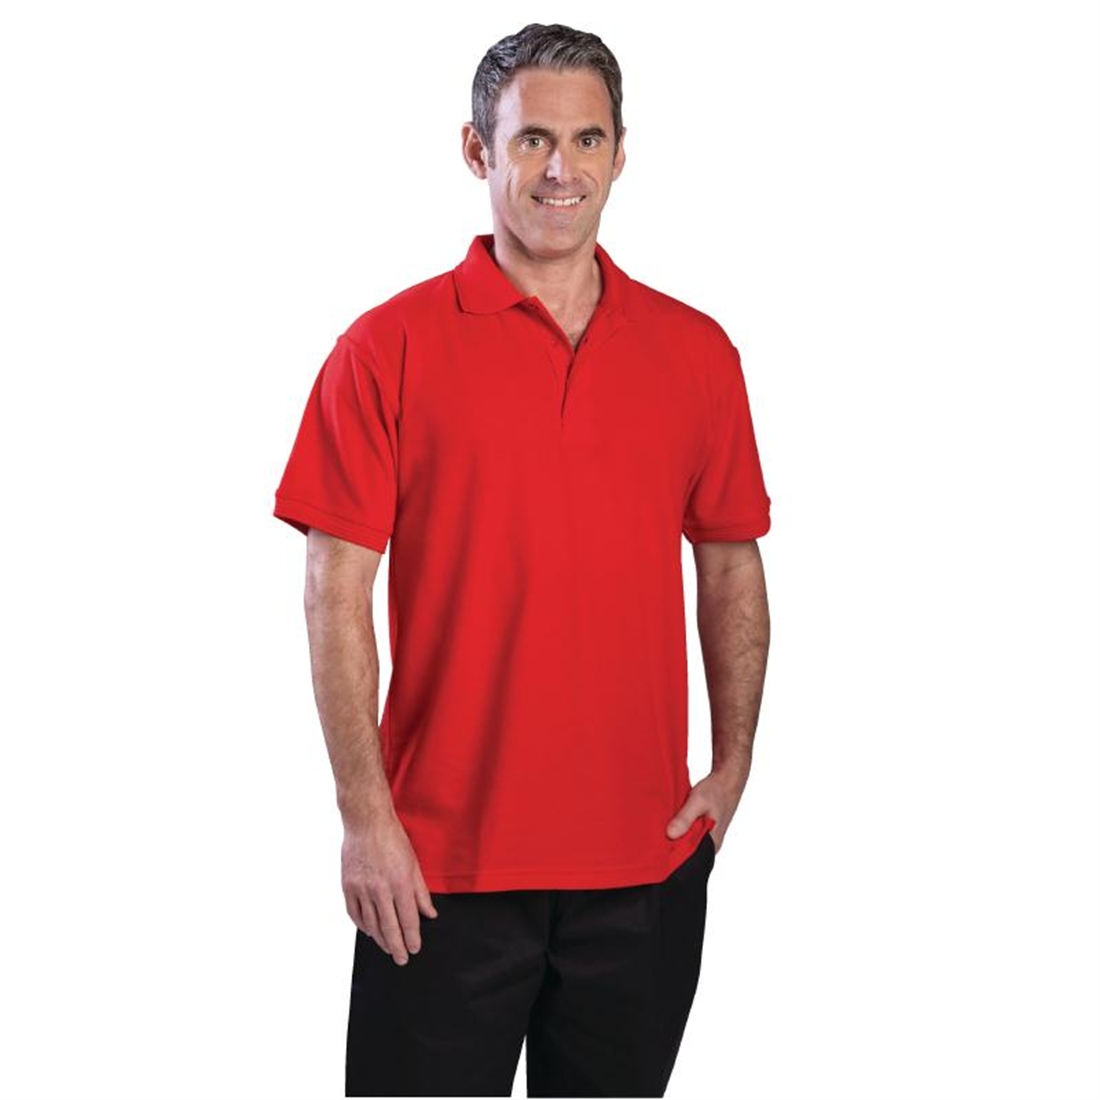 Unisex Polo Shirt Red L